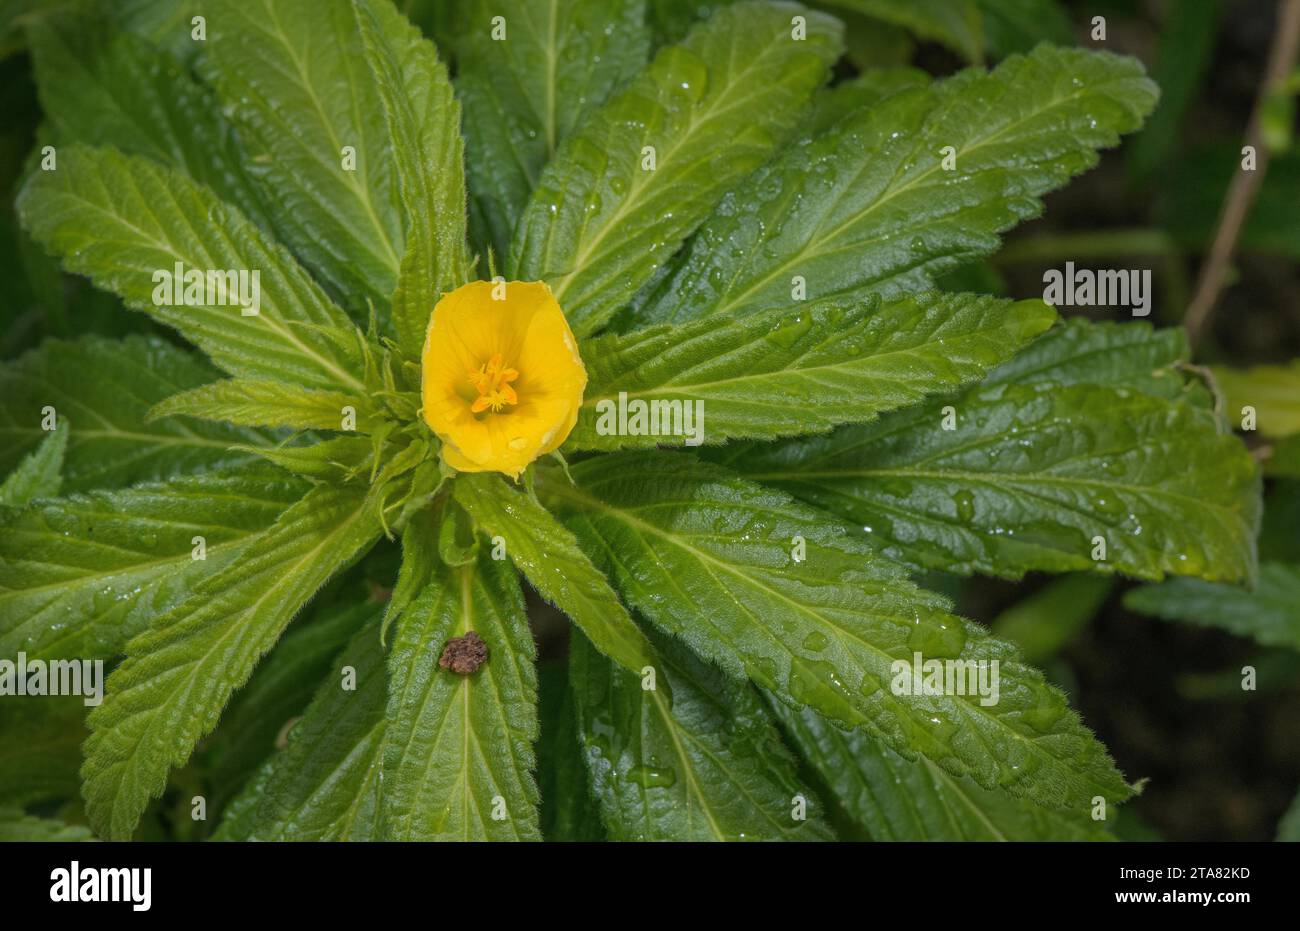 Damiana, Turnera diffusa in flower. A shrub from south-east USA. Stock Photo